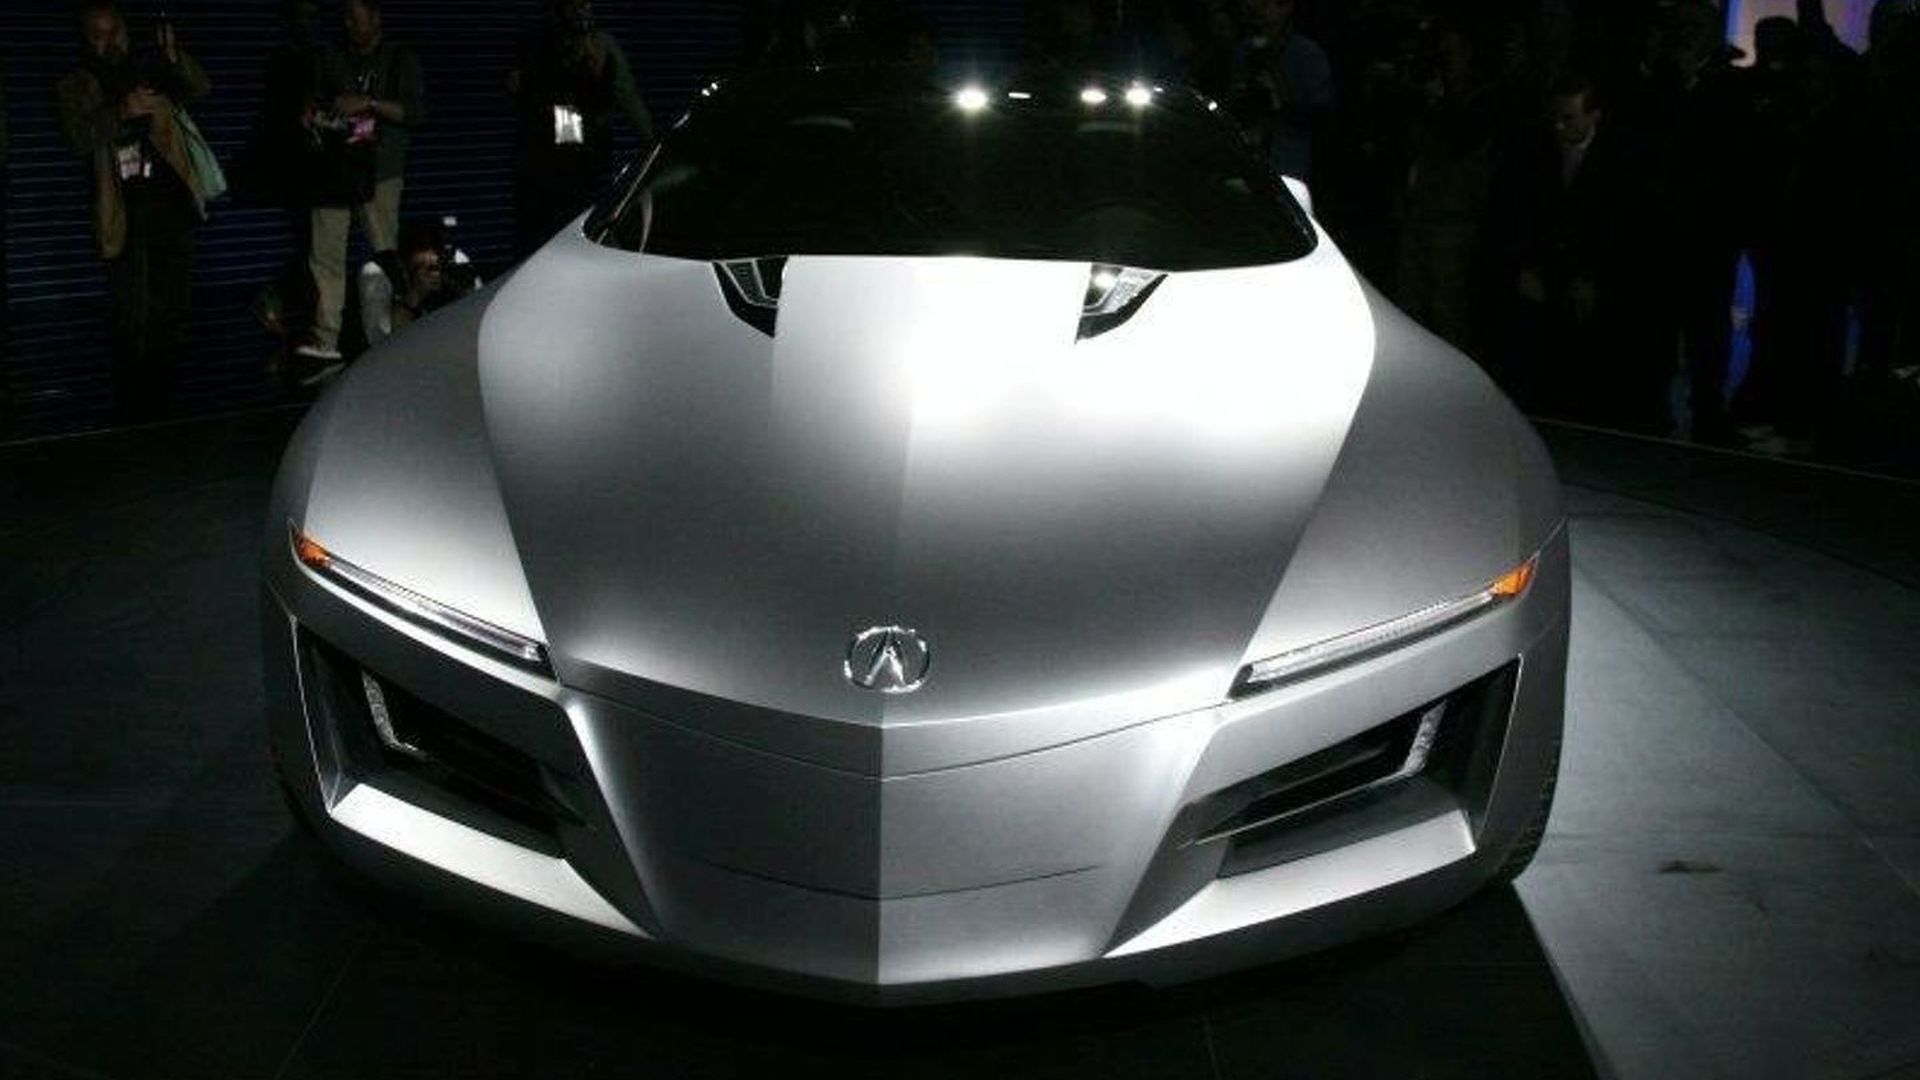 Acura Advanced Sports Car Concept Wallpapers